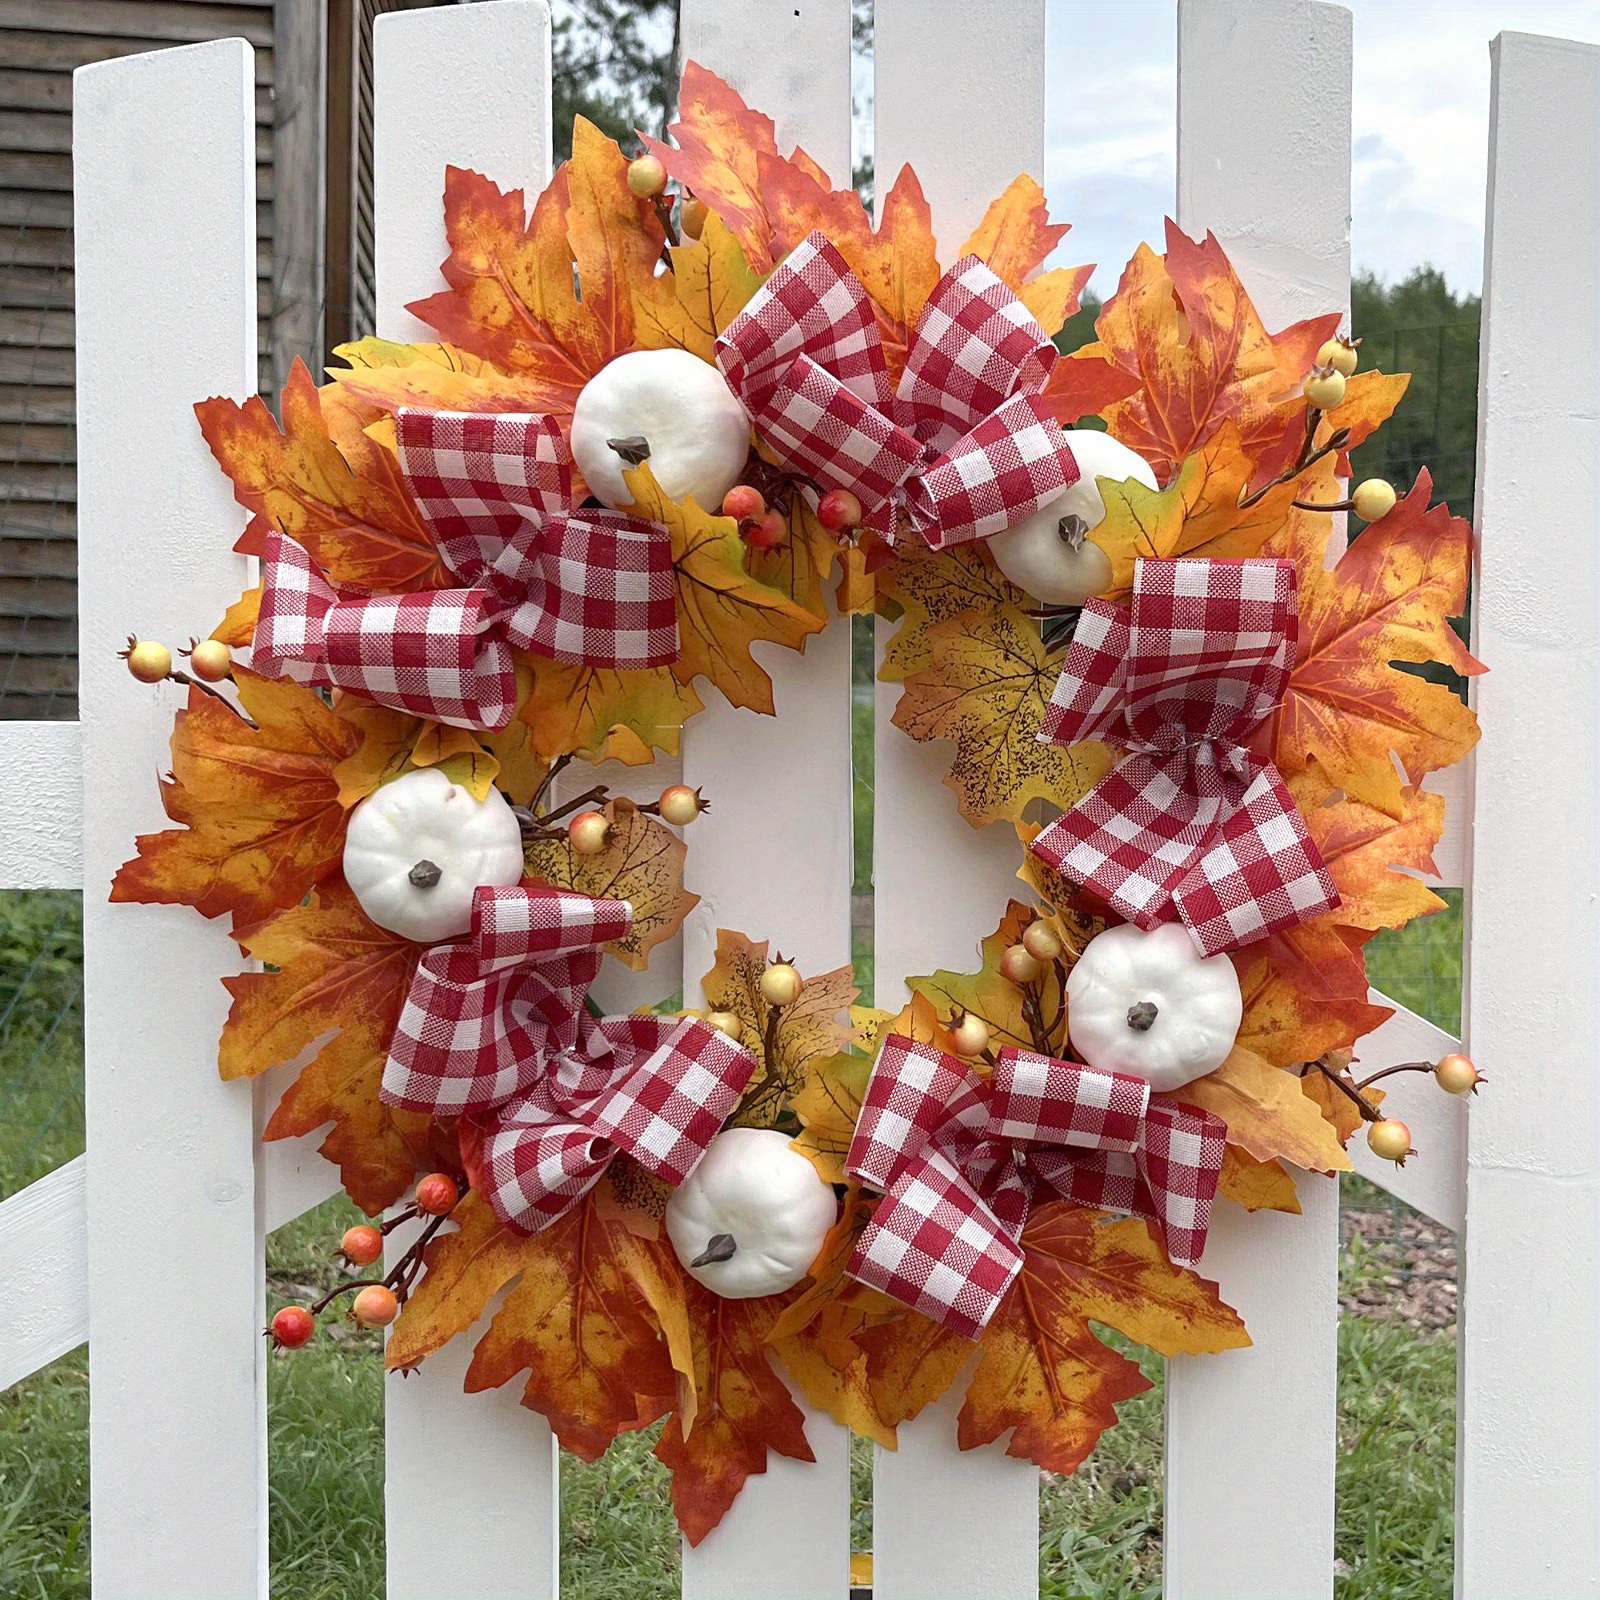 Fall Peony and Pumpkin Wreath - Year Round Wreath, Artificial Fall Wreath, Autumn Front Door Wreath Thanksgiving Wreath for Home Farmhouse Decor and